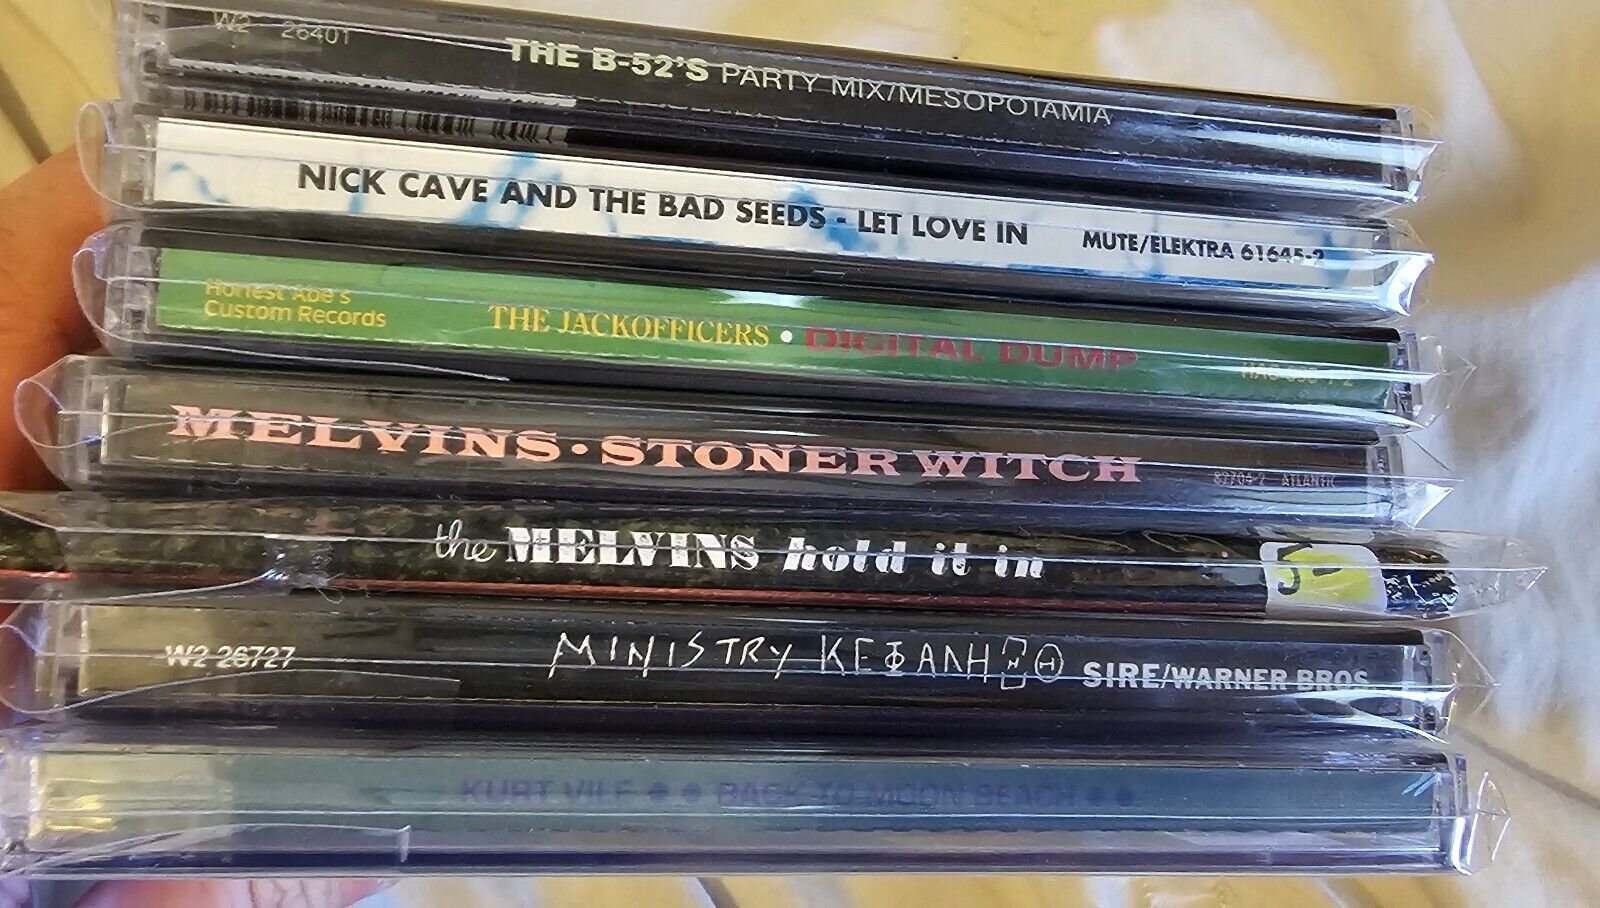 MELVINS BUTTHOLE SURFERS MINISTRY CAVE Lot of 7 CDs Indie Very Good Cleaned